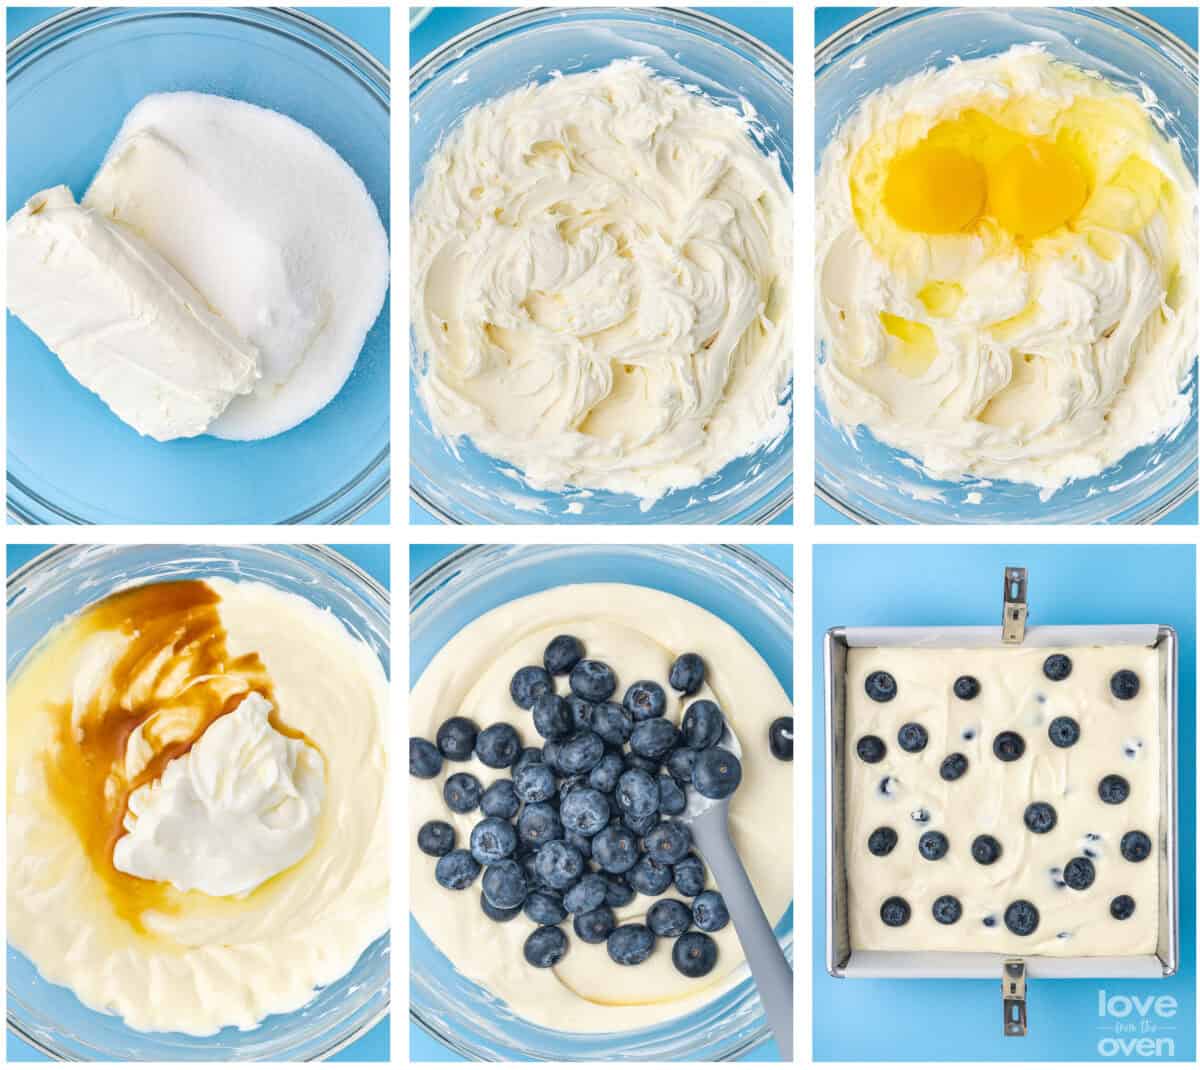 Step by step instructions showing how to make blueberry cheesecake bars